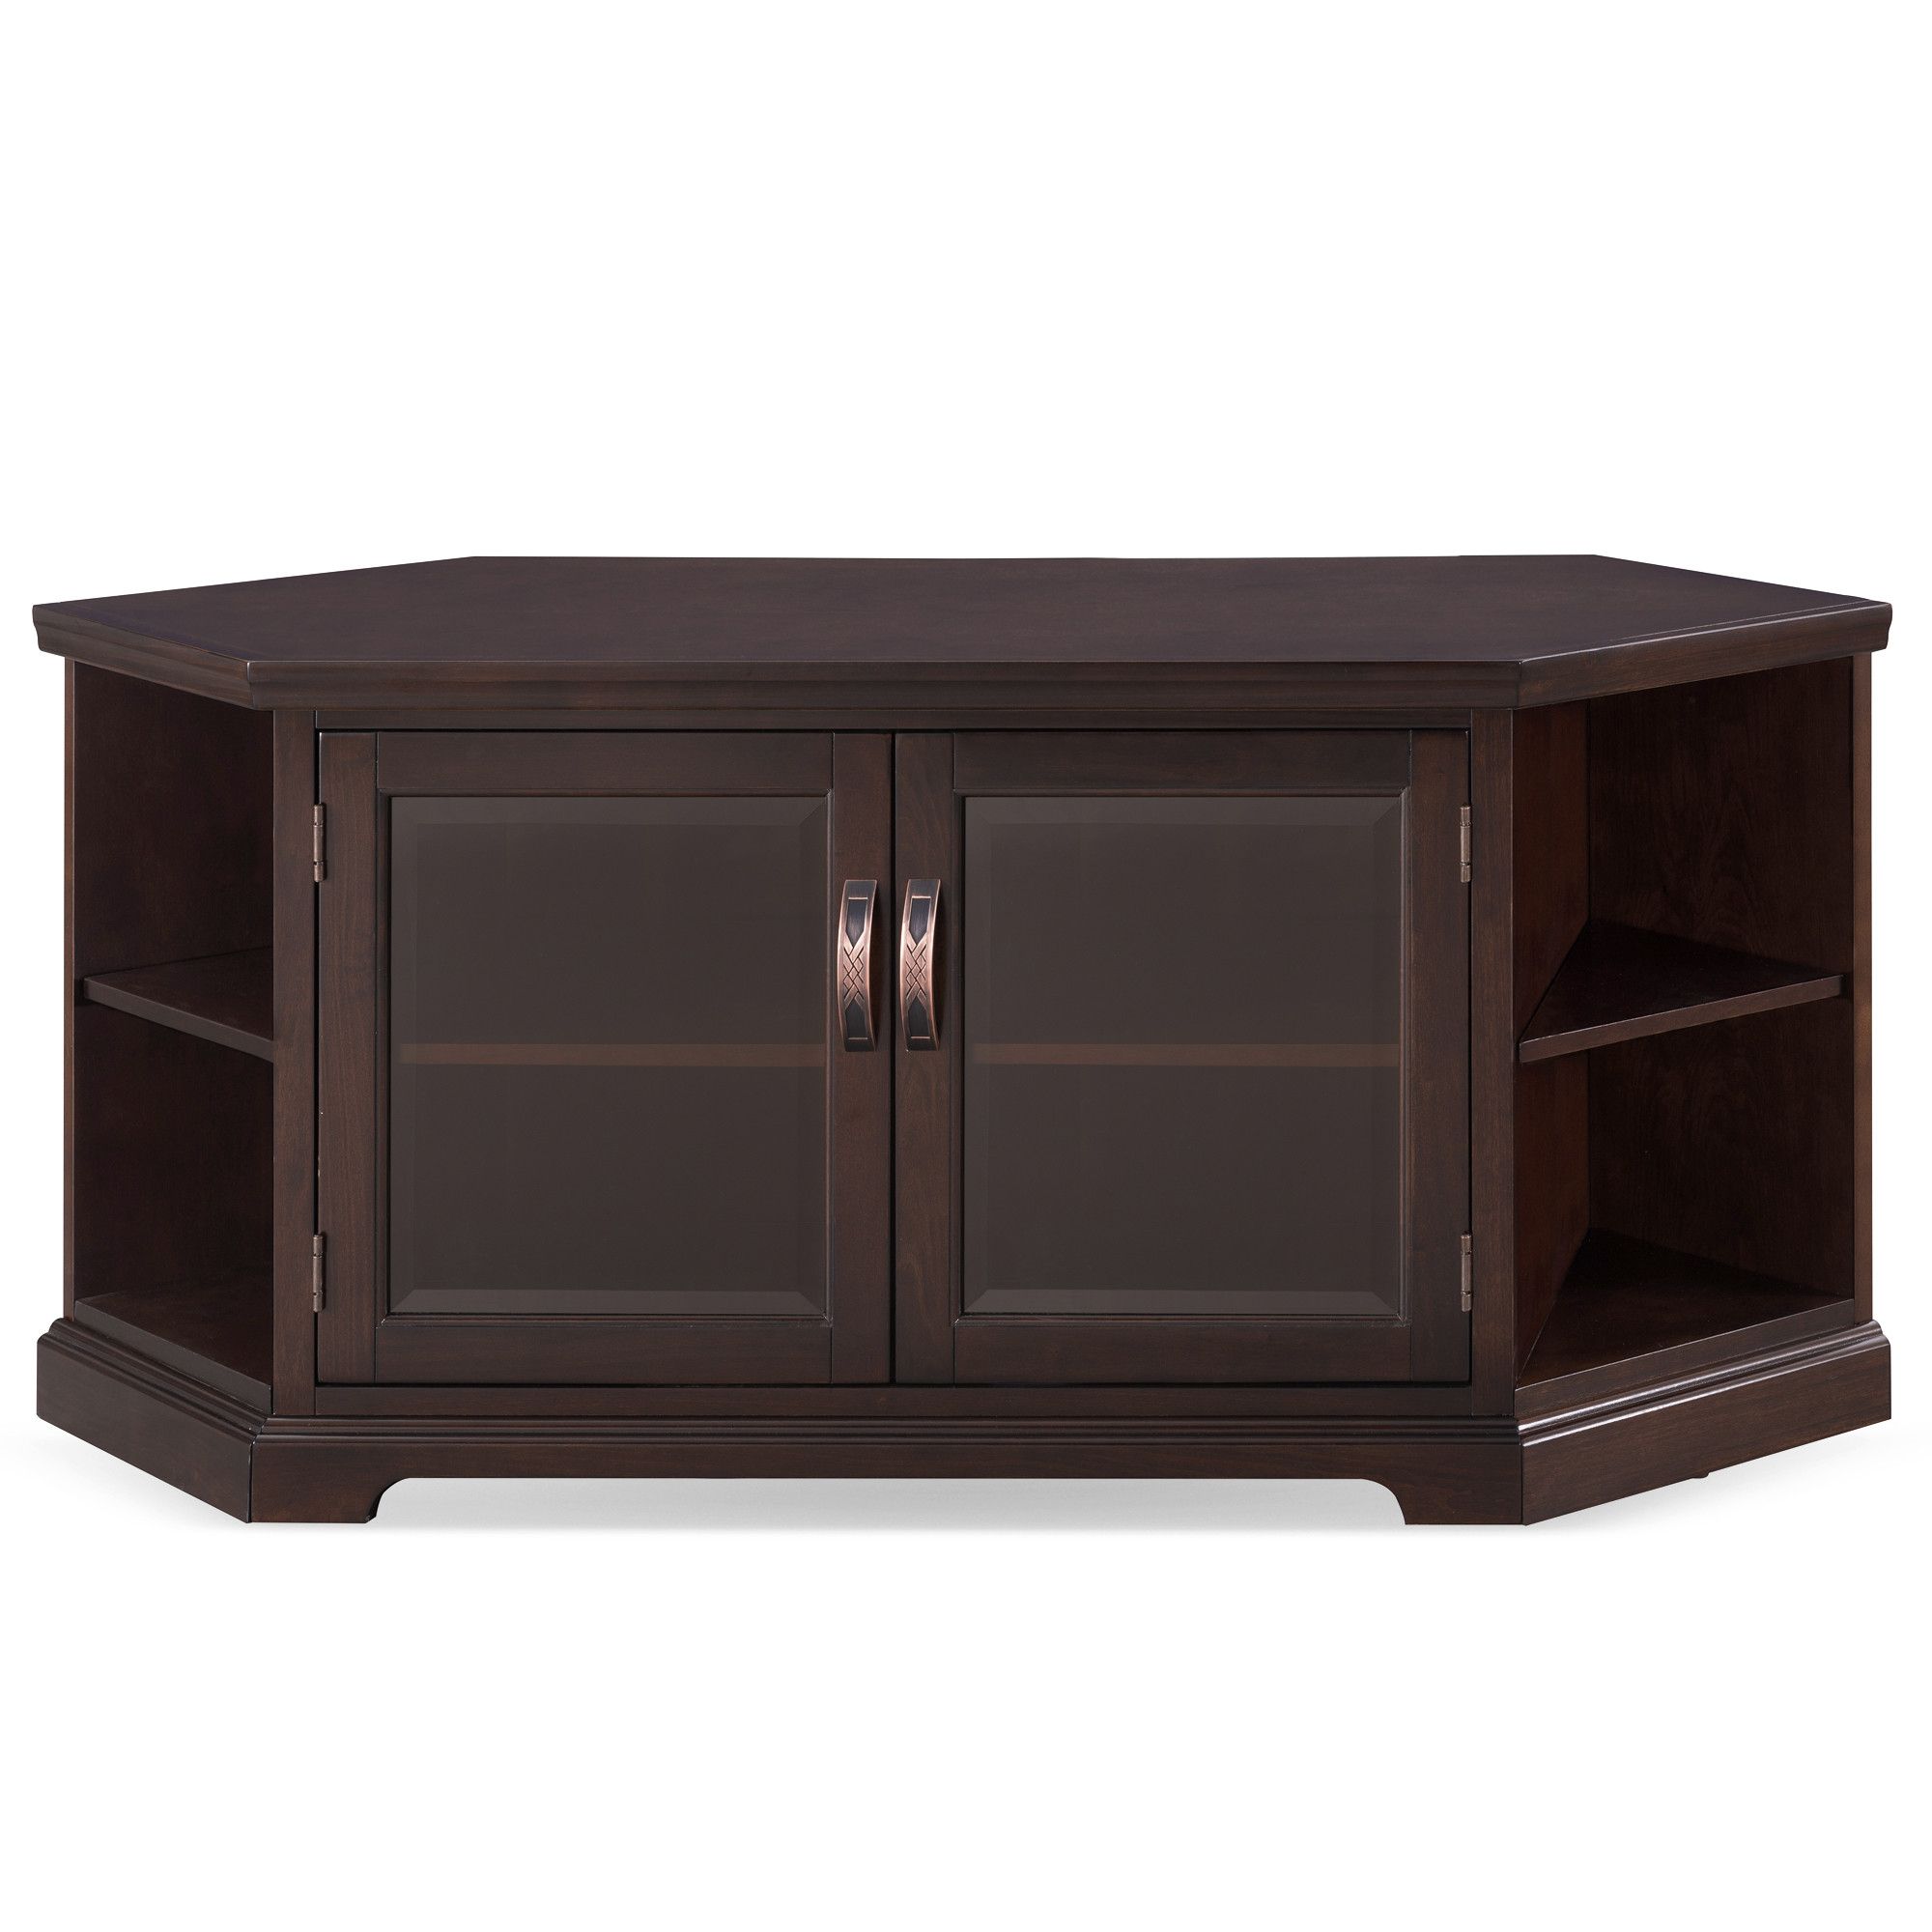 Chocolate Cherry & Bronze Glass Corner Tv Stand With With Regard To Most Recent Exhibit Corner Tv Stands (View 4 of 10)